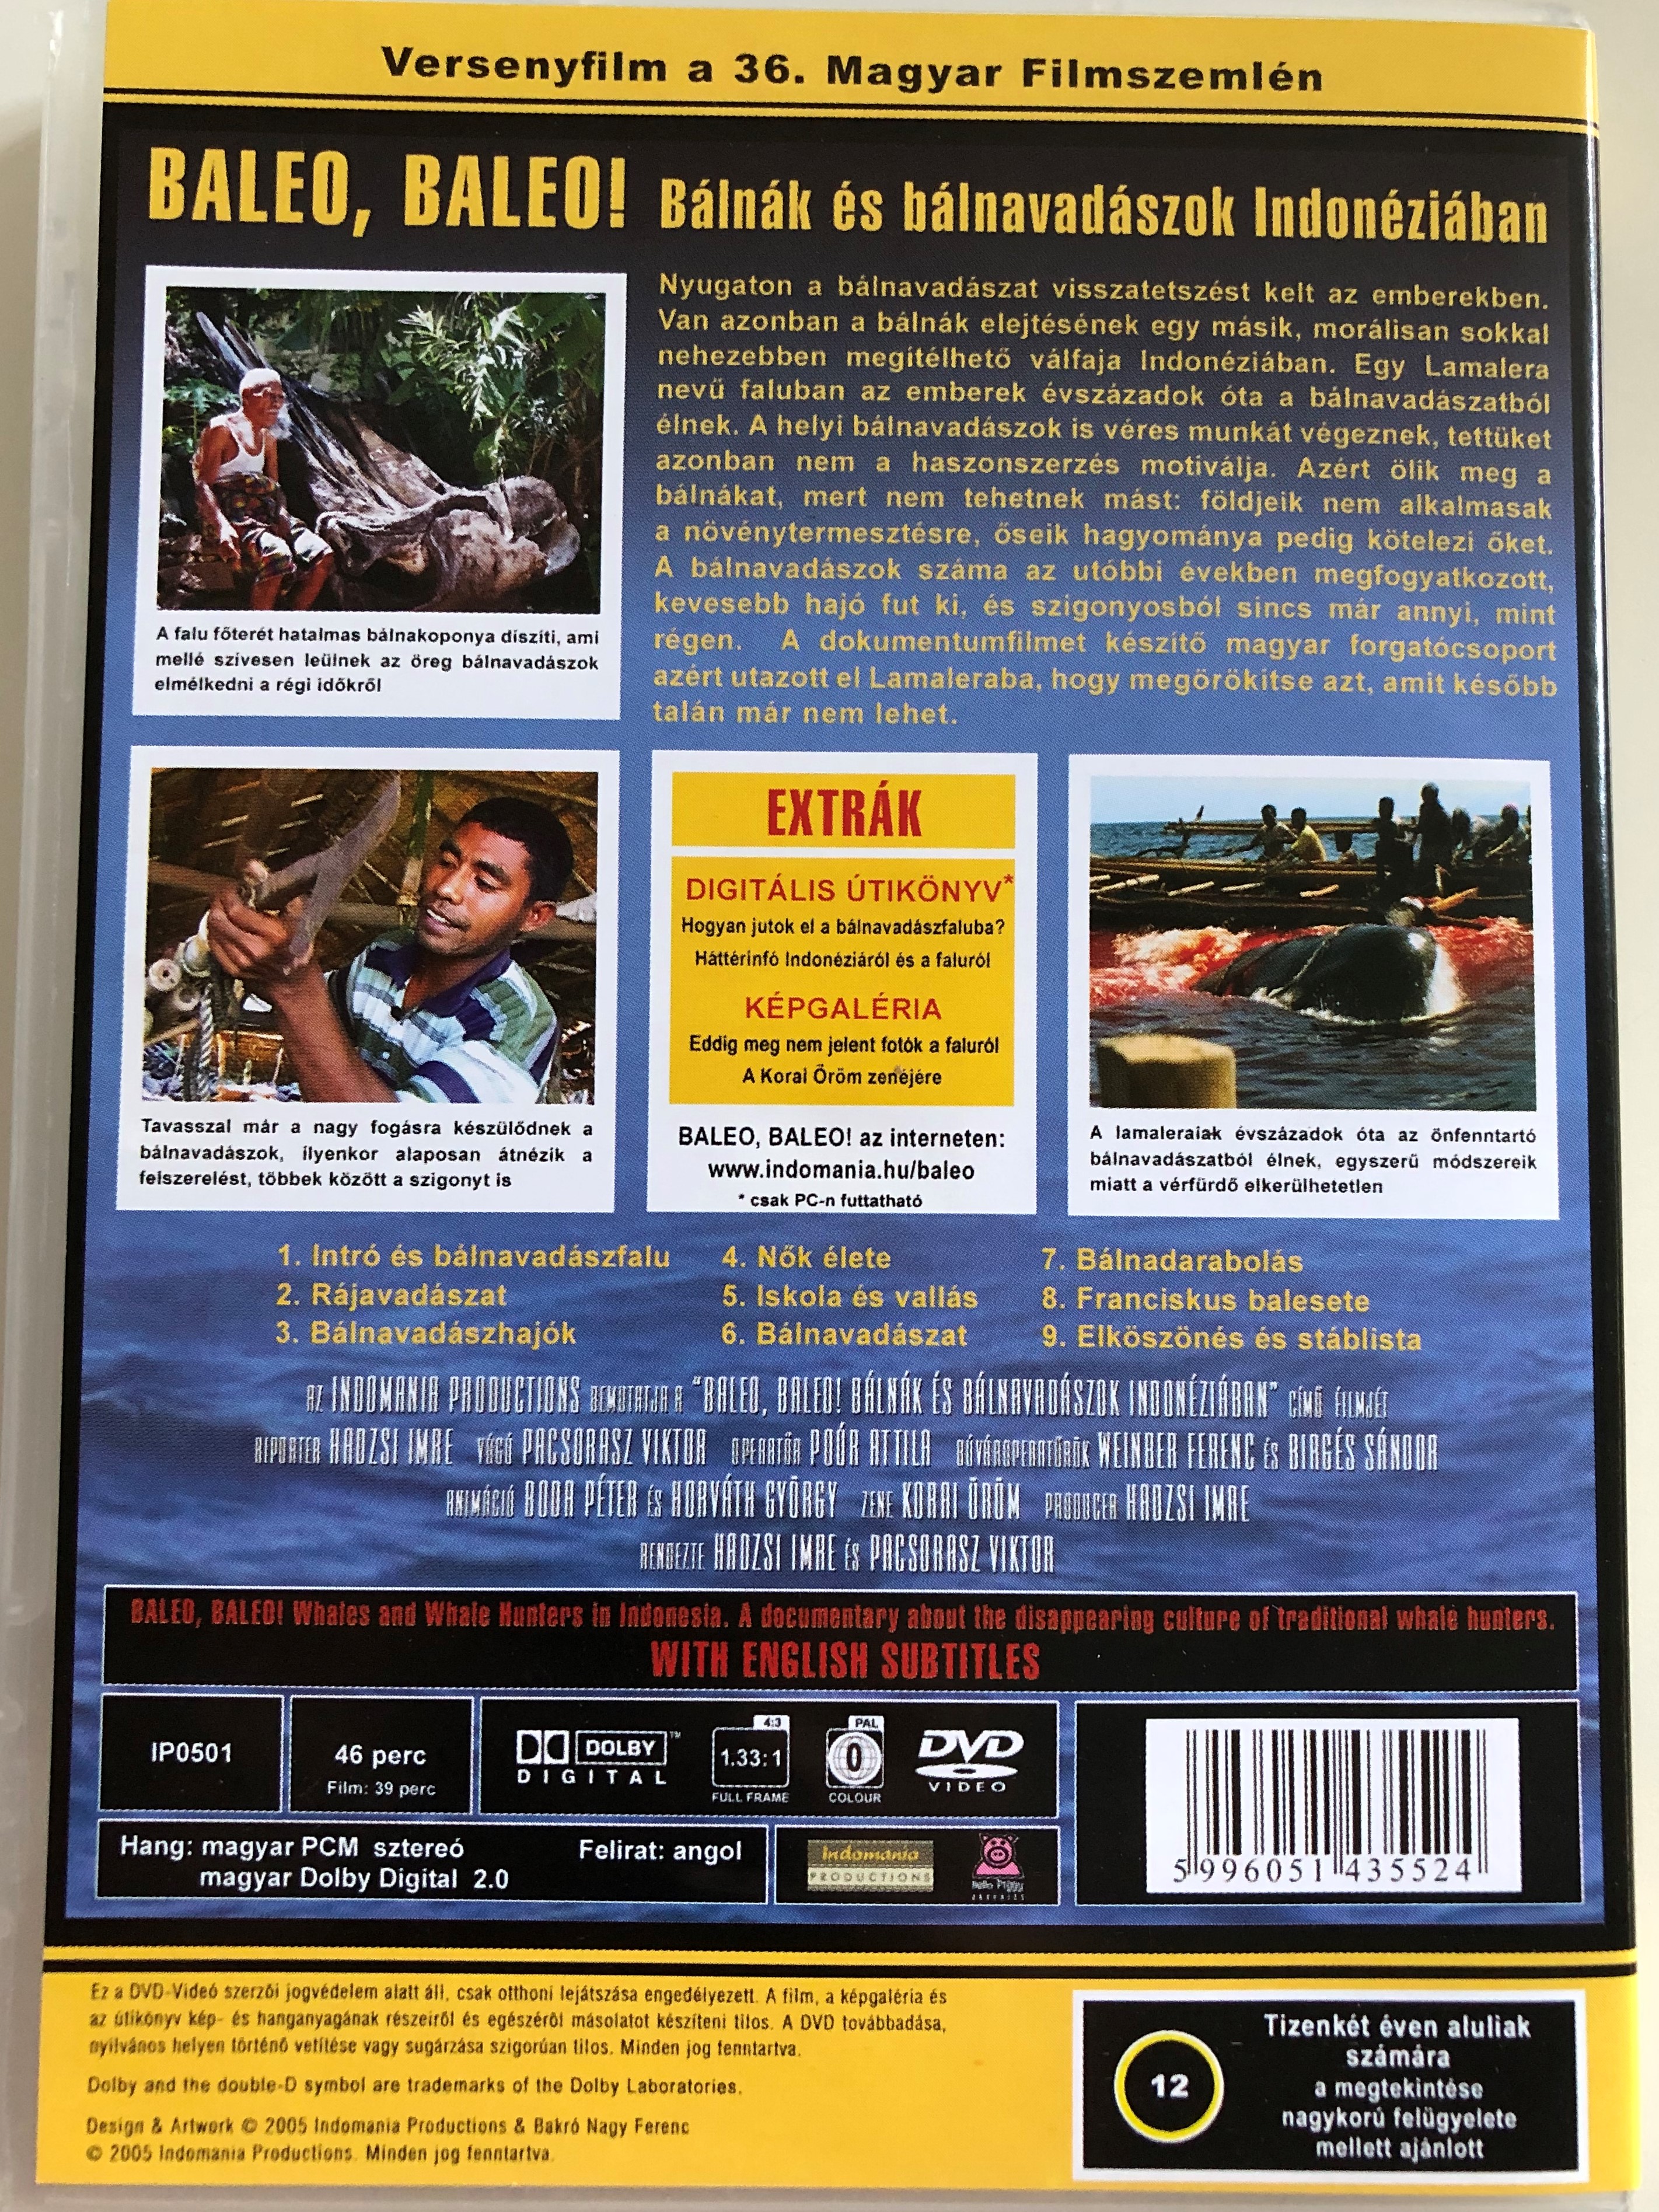 baleo-baleo-whales-and-whale-hunters-in-indonesia-dvd-2005-baleo-baleo-b-ln-k-s-b-lnavad-szok-indon-zi-ban-directed-by-hadzsi-imre-pacsorasz-viktor-documentary-about-the-disappearing-culture-of-traditional-whale-hun.jpg